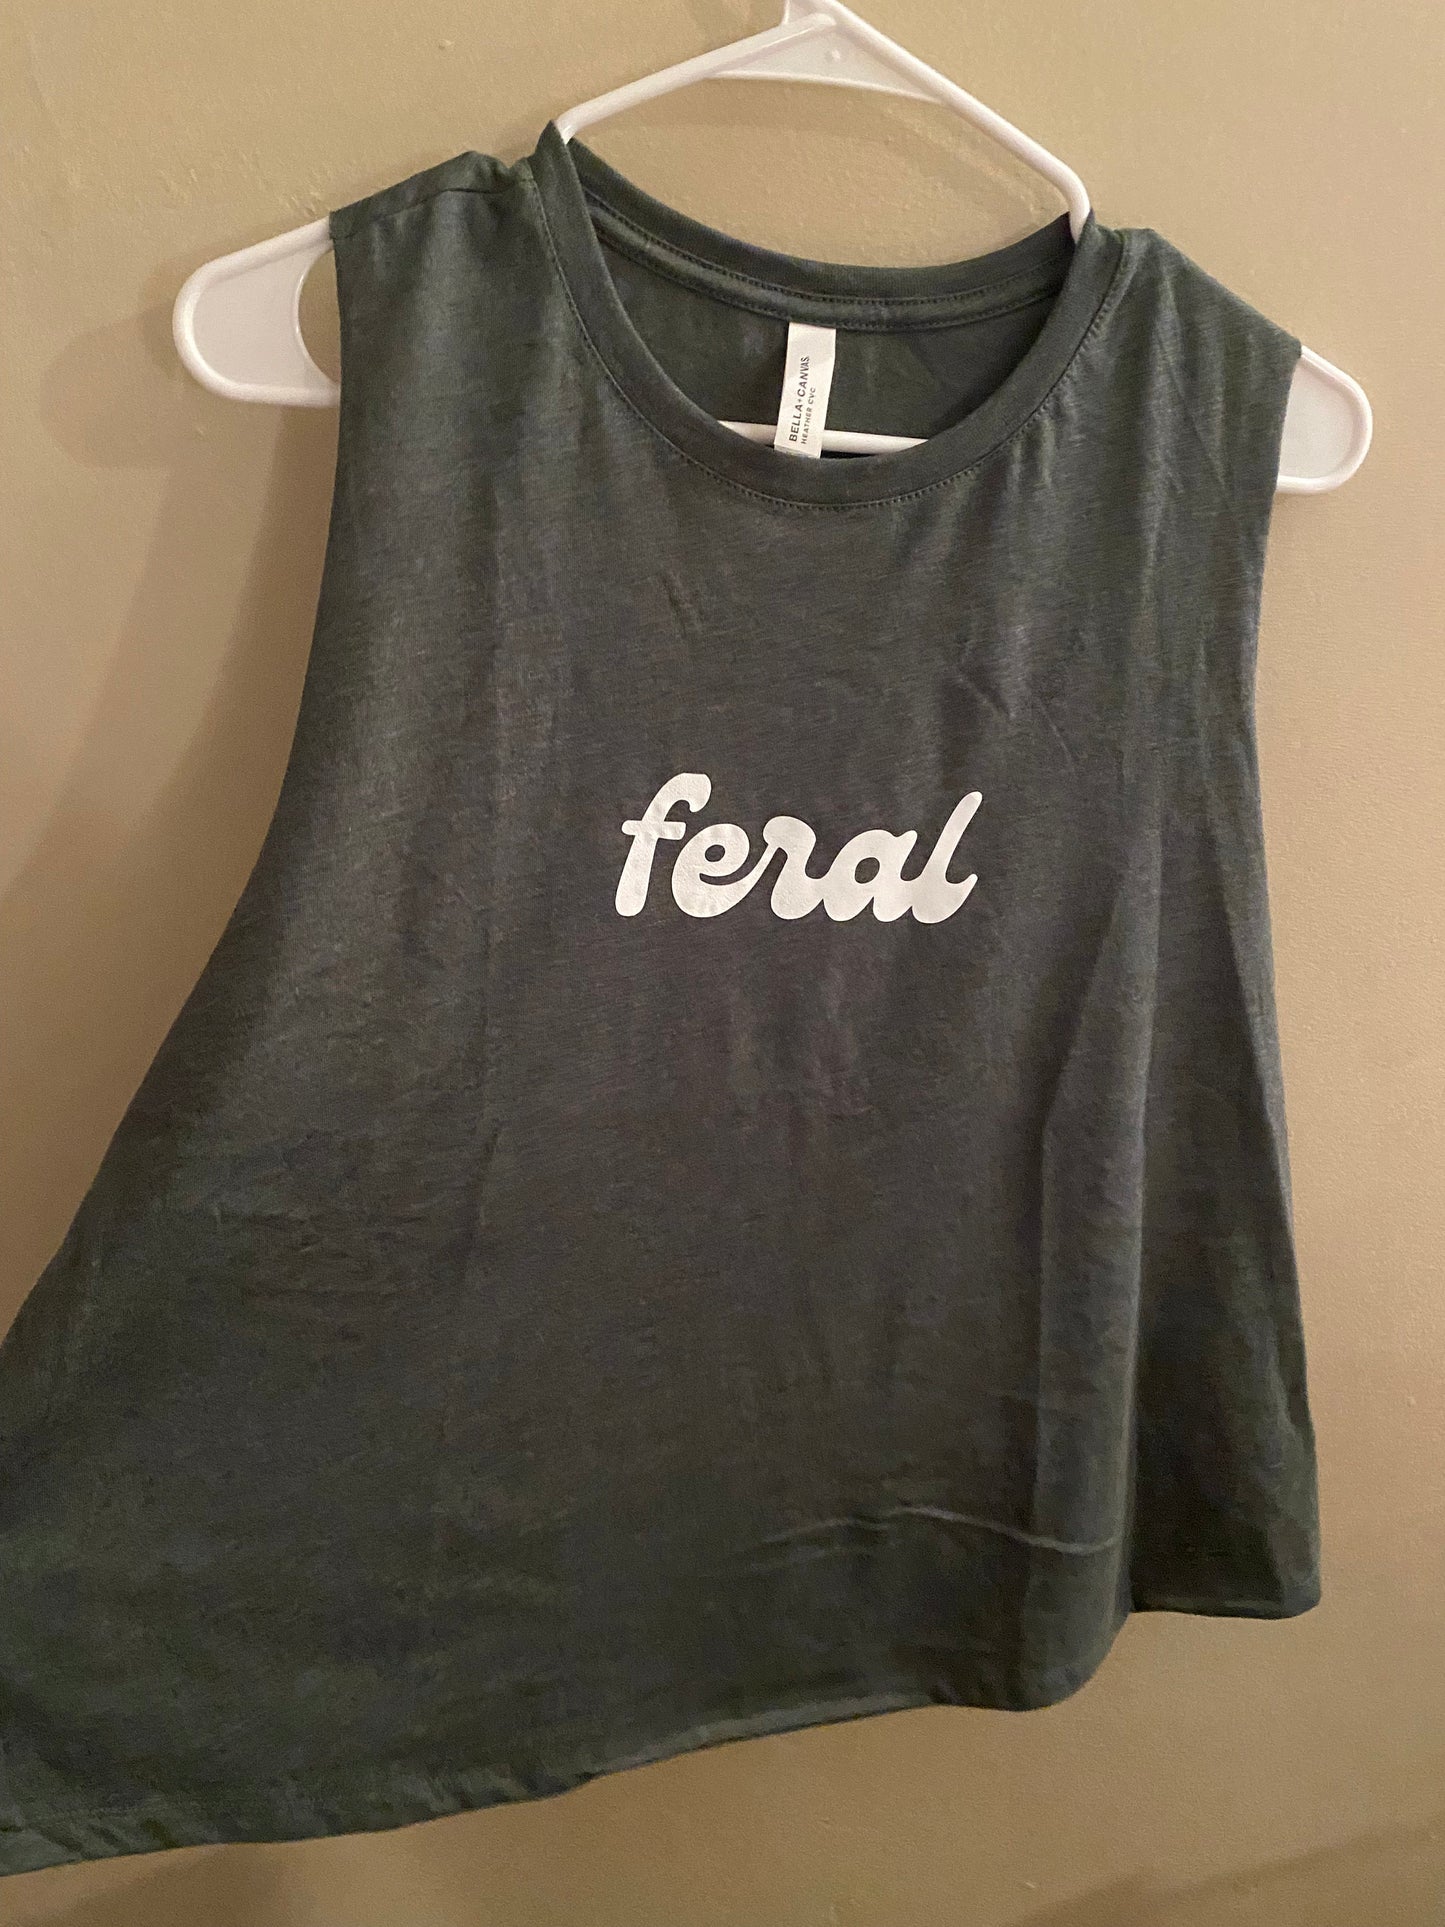 Feral Bella Tank Top, Size Medium workout tank top, Graphic Tee, Graphic Shirt, Lettered t-shirt, Funny Shirt, Funny Work out tank